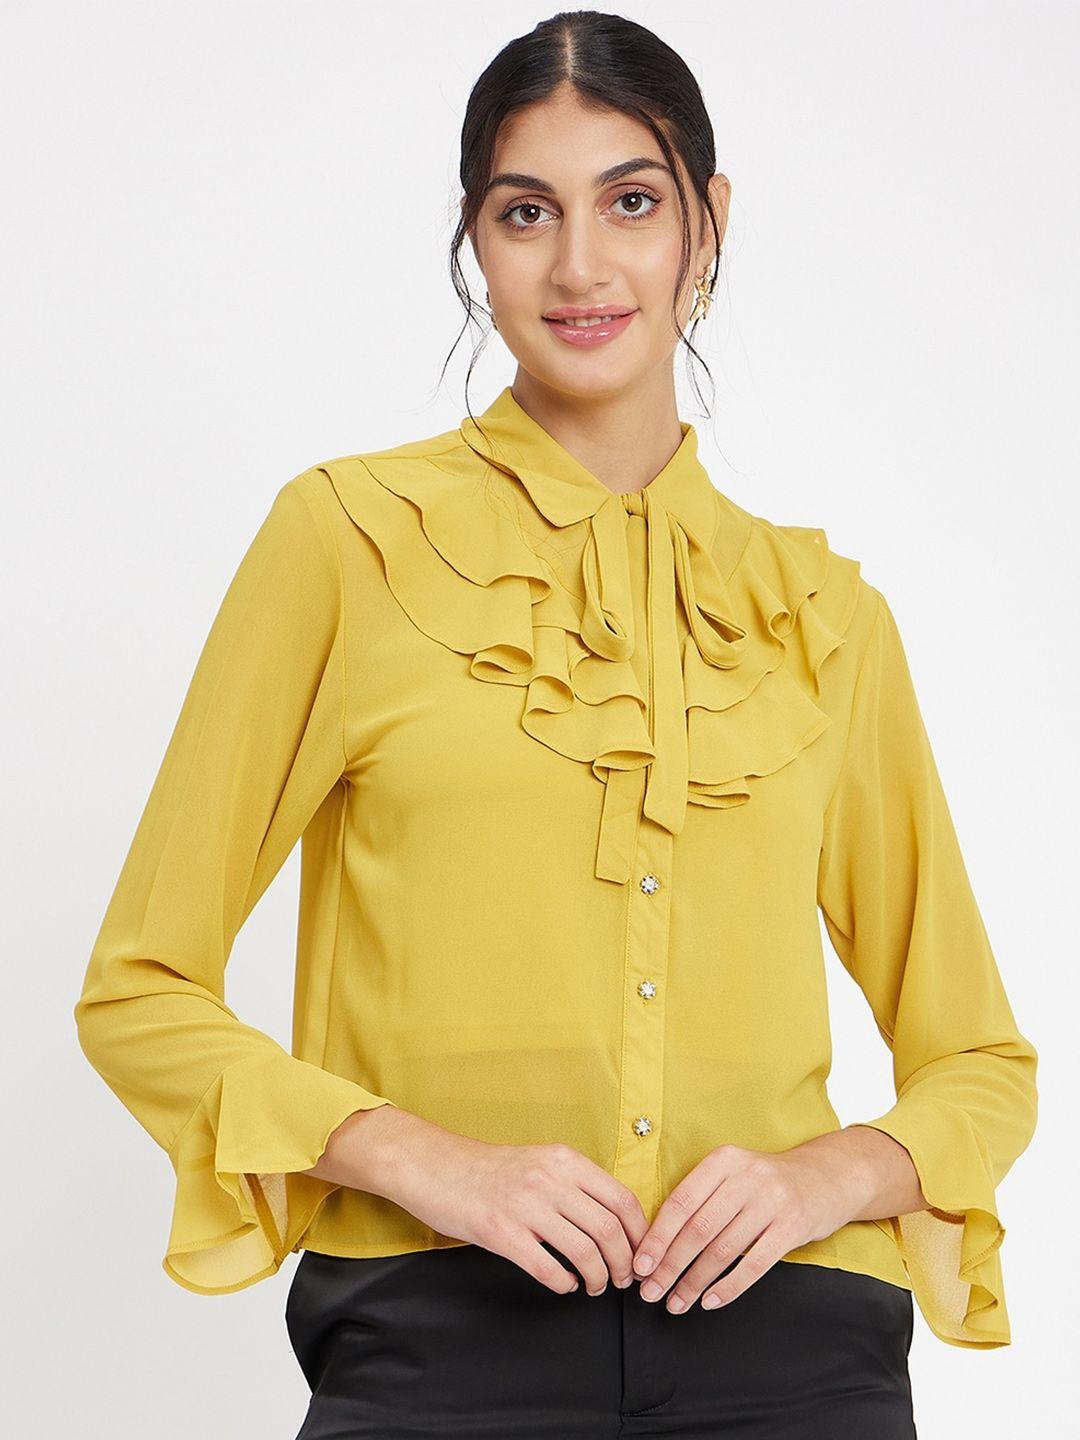 Madame Tie-Up Neck Bell Sleeve Shirt Style Top